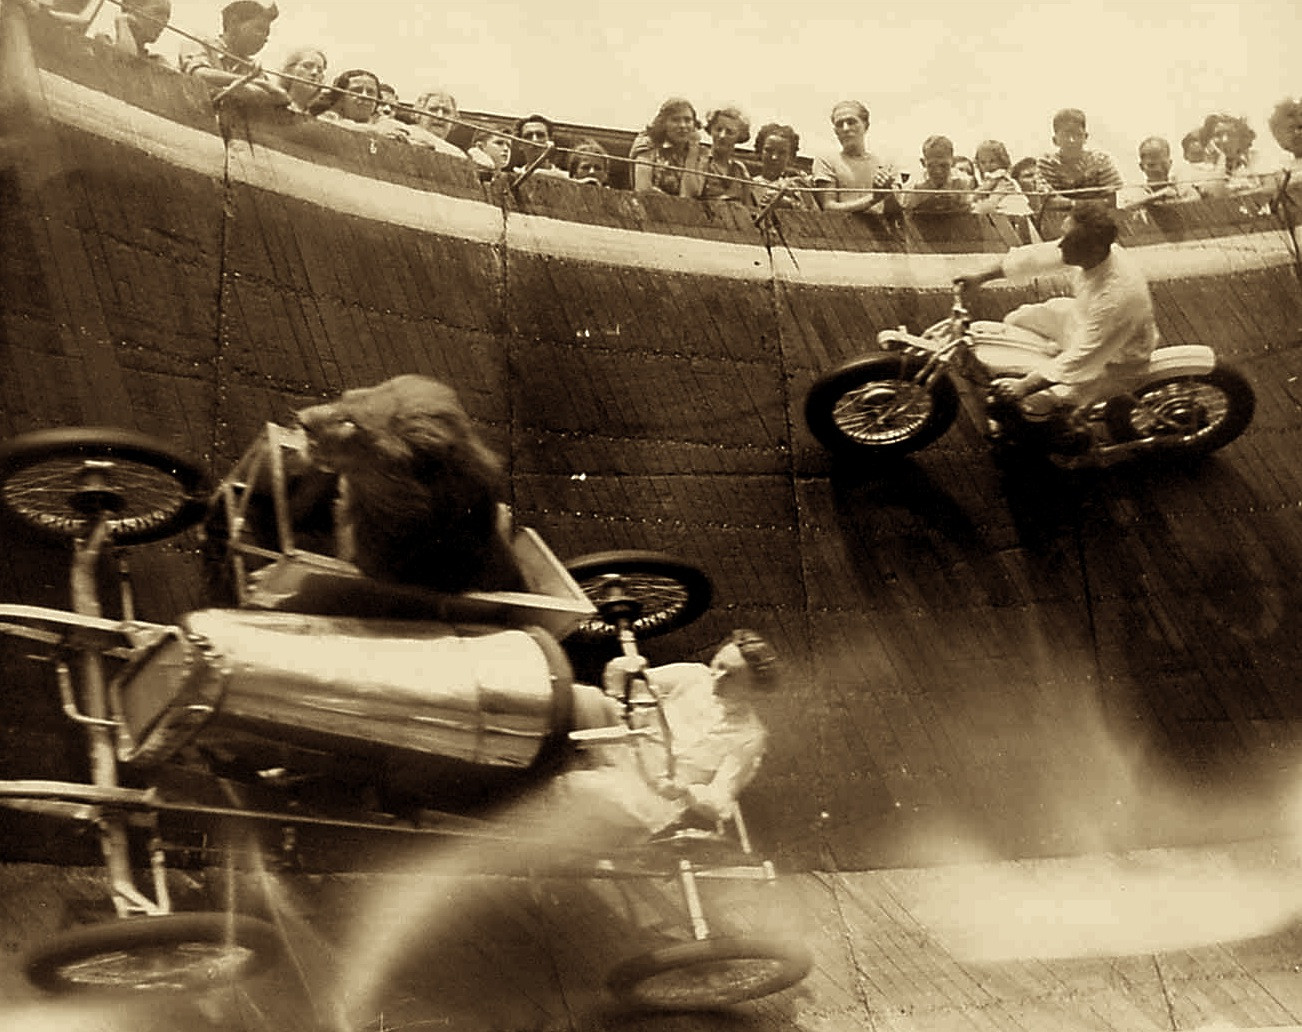 A lion riding in the sidecar of a go-kart at a wall of death carnival attraction at Revere Beach, Massachusetts, c. 1929